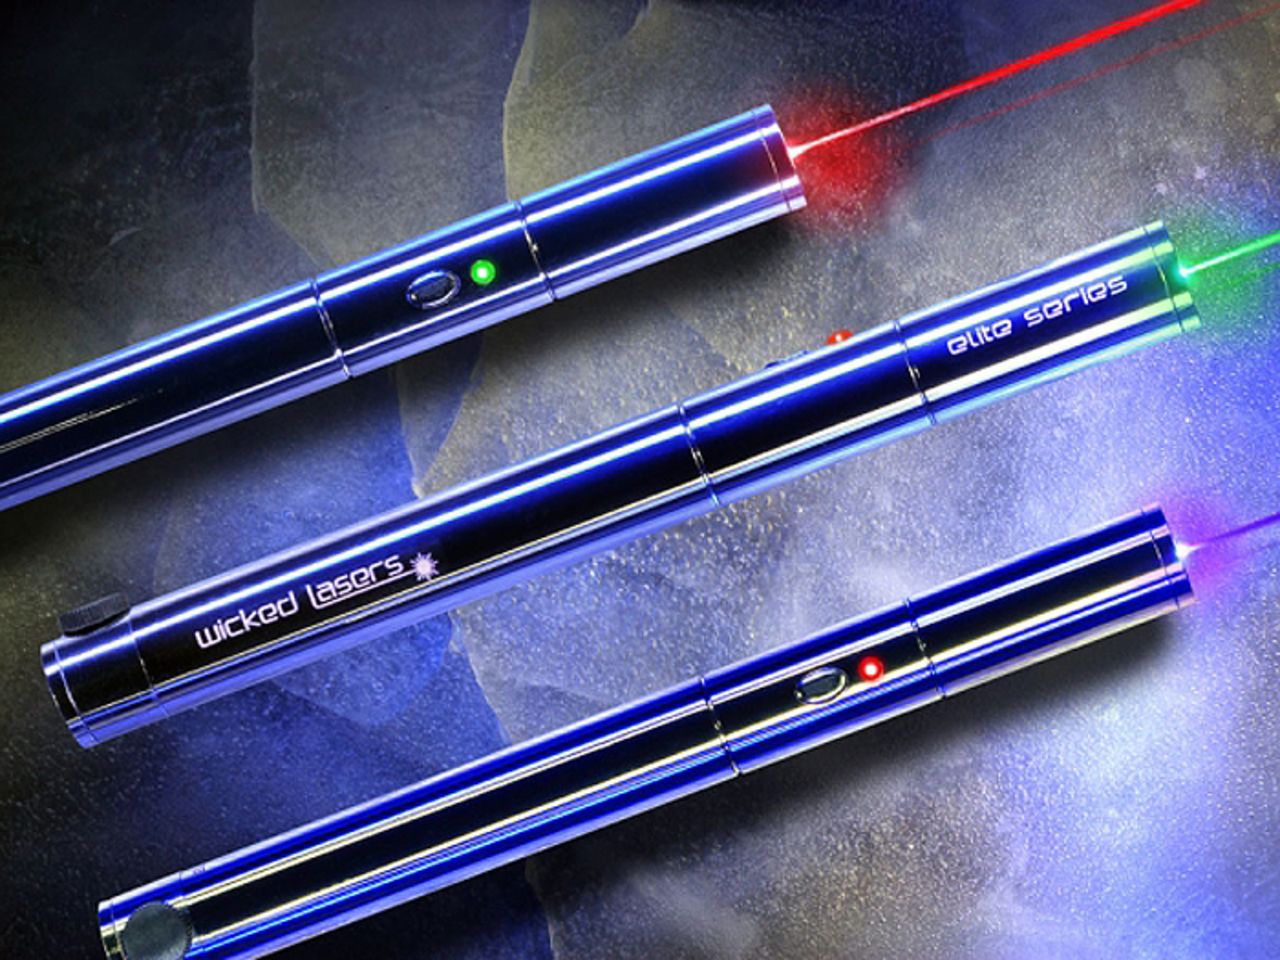 The laser of the Elite Pro is so intense it can burn through even sturdy materials. Featured on <em>Discovery Channel's</em> "Future Weapons", the lasers are used to point a strong beam towards a suspect so as to temporarily thwart their eyesight without causing permanent eye damage.